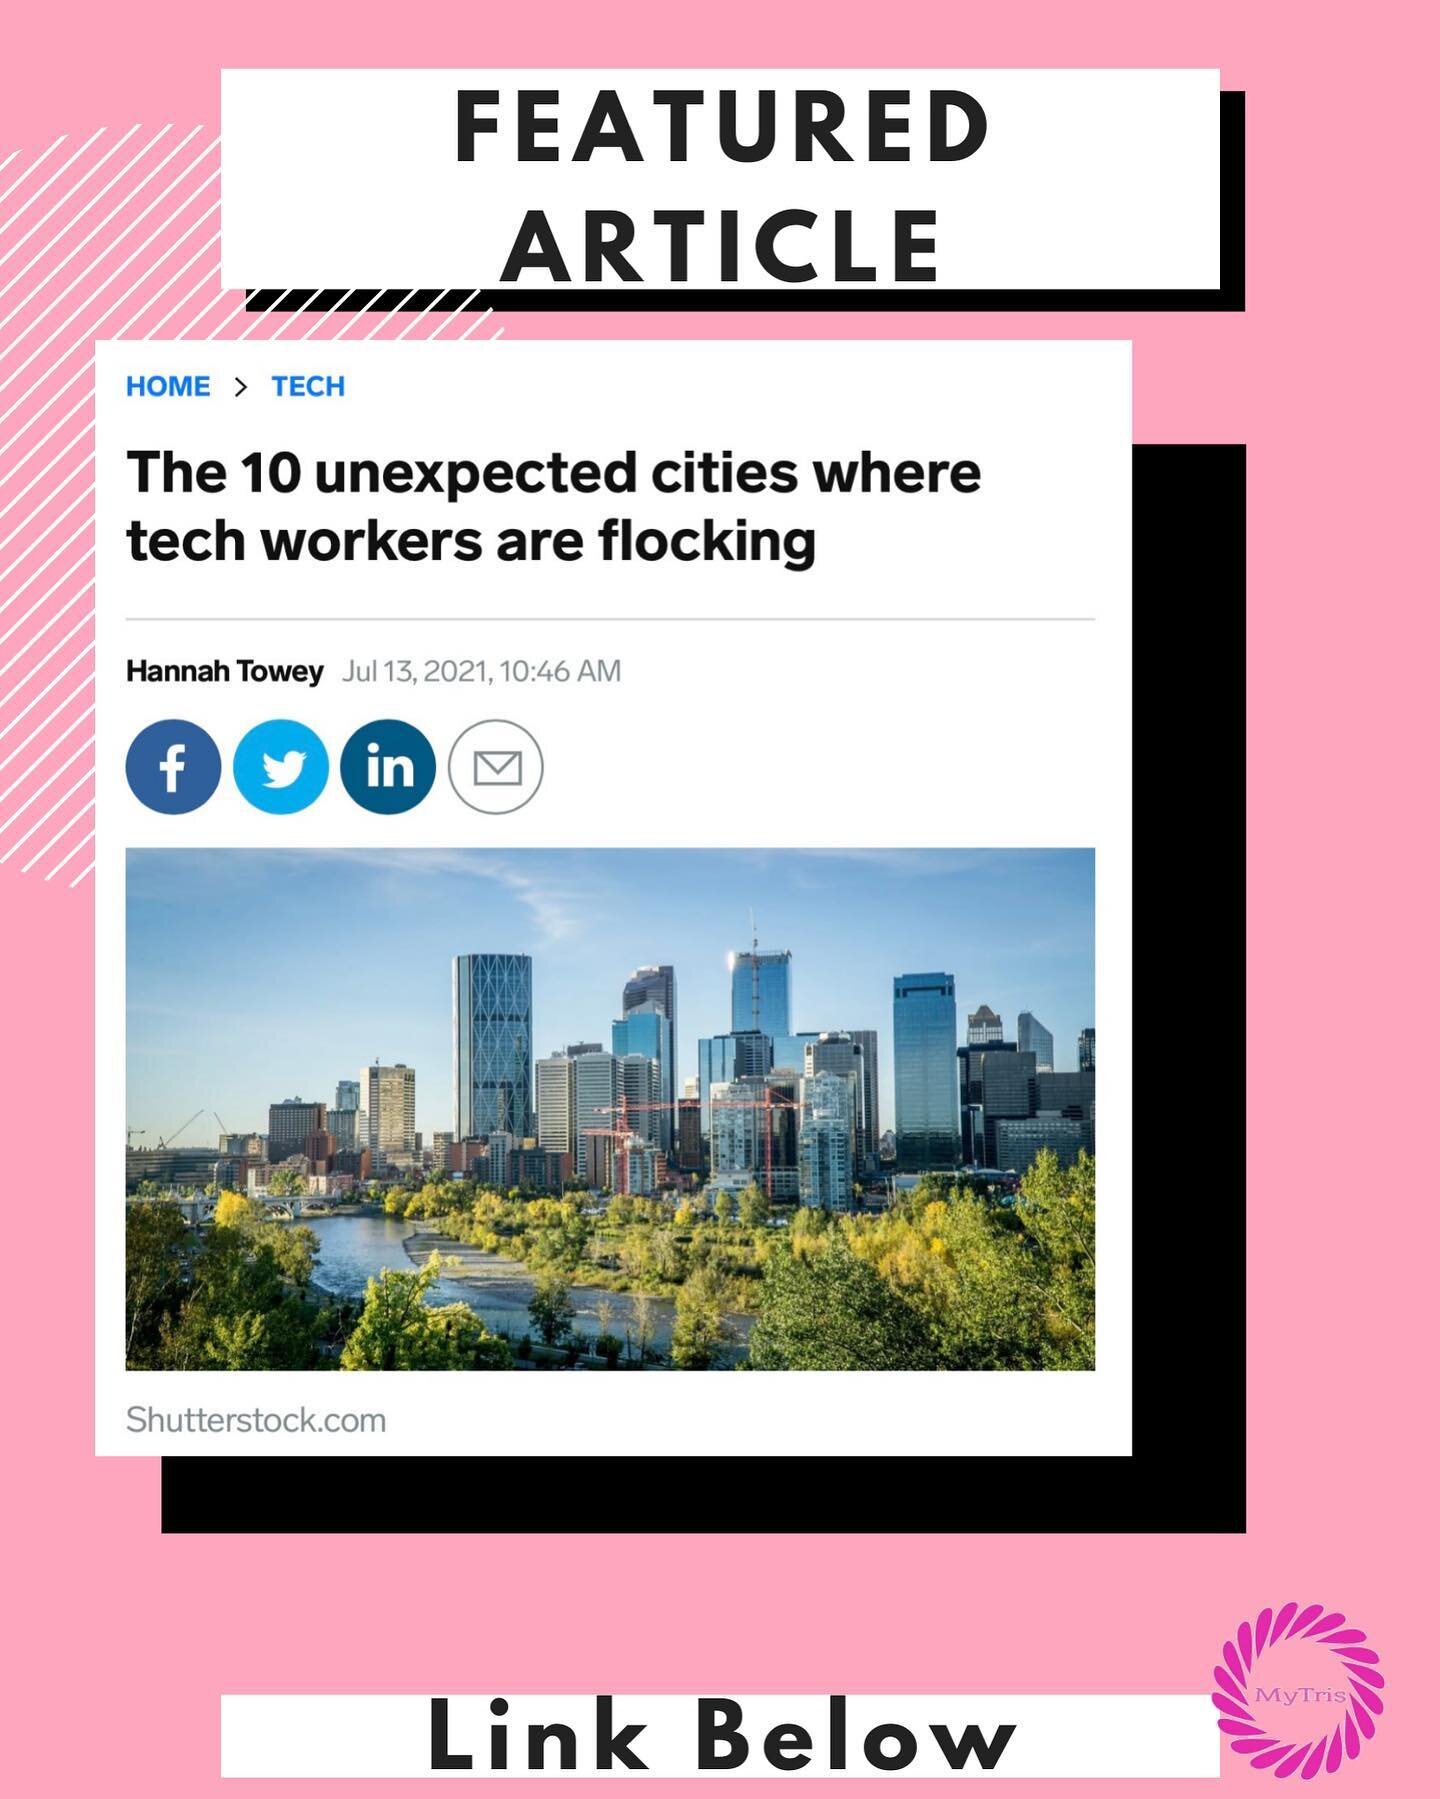 This was a really interesting article, I was shocked to see Nashville and Columbus, OH on the list.

Great info for all my Tech folks, check out full article at the link below:

https://www.businessinsider.com/unexpected-cities-where-tech-employees-l